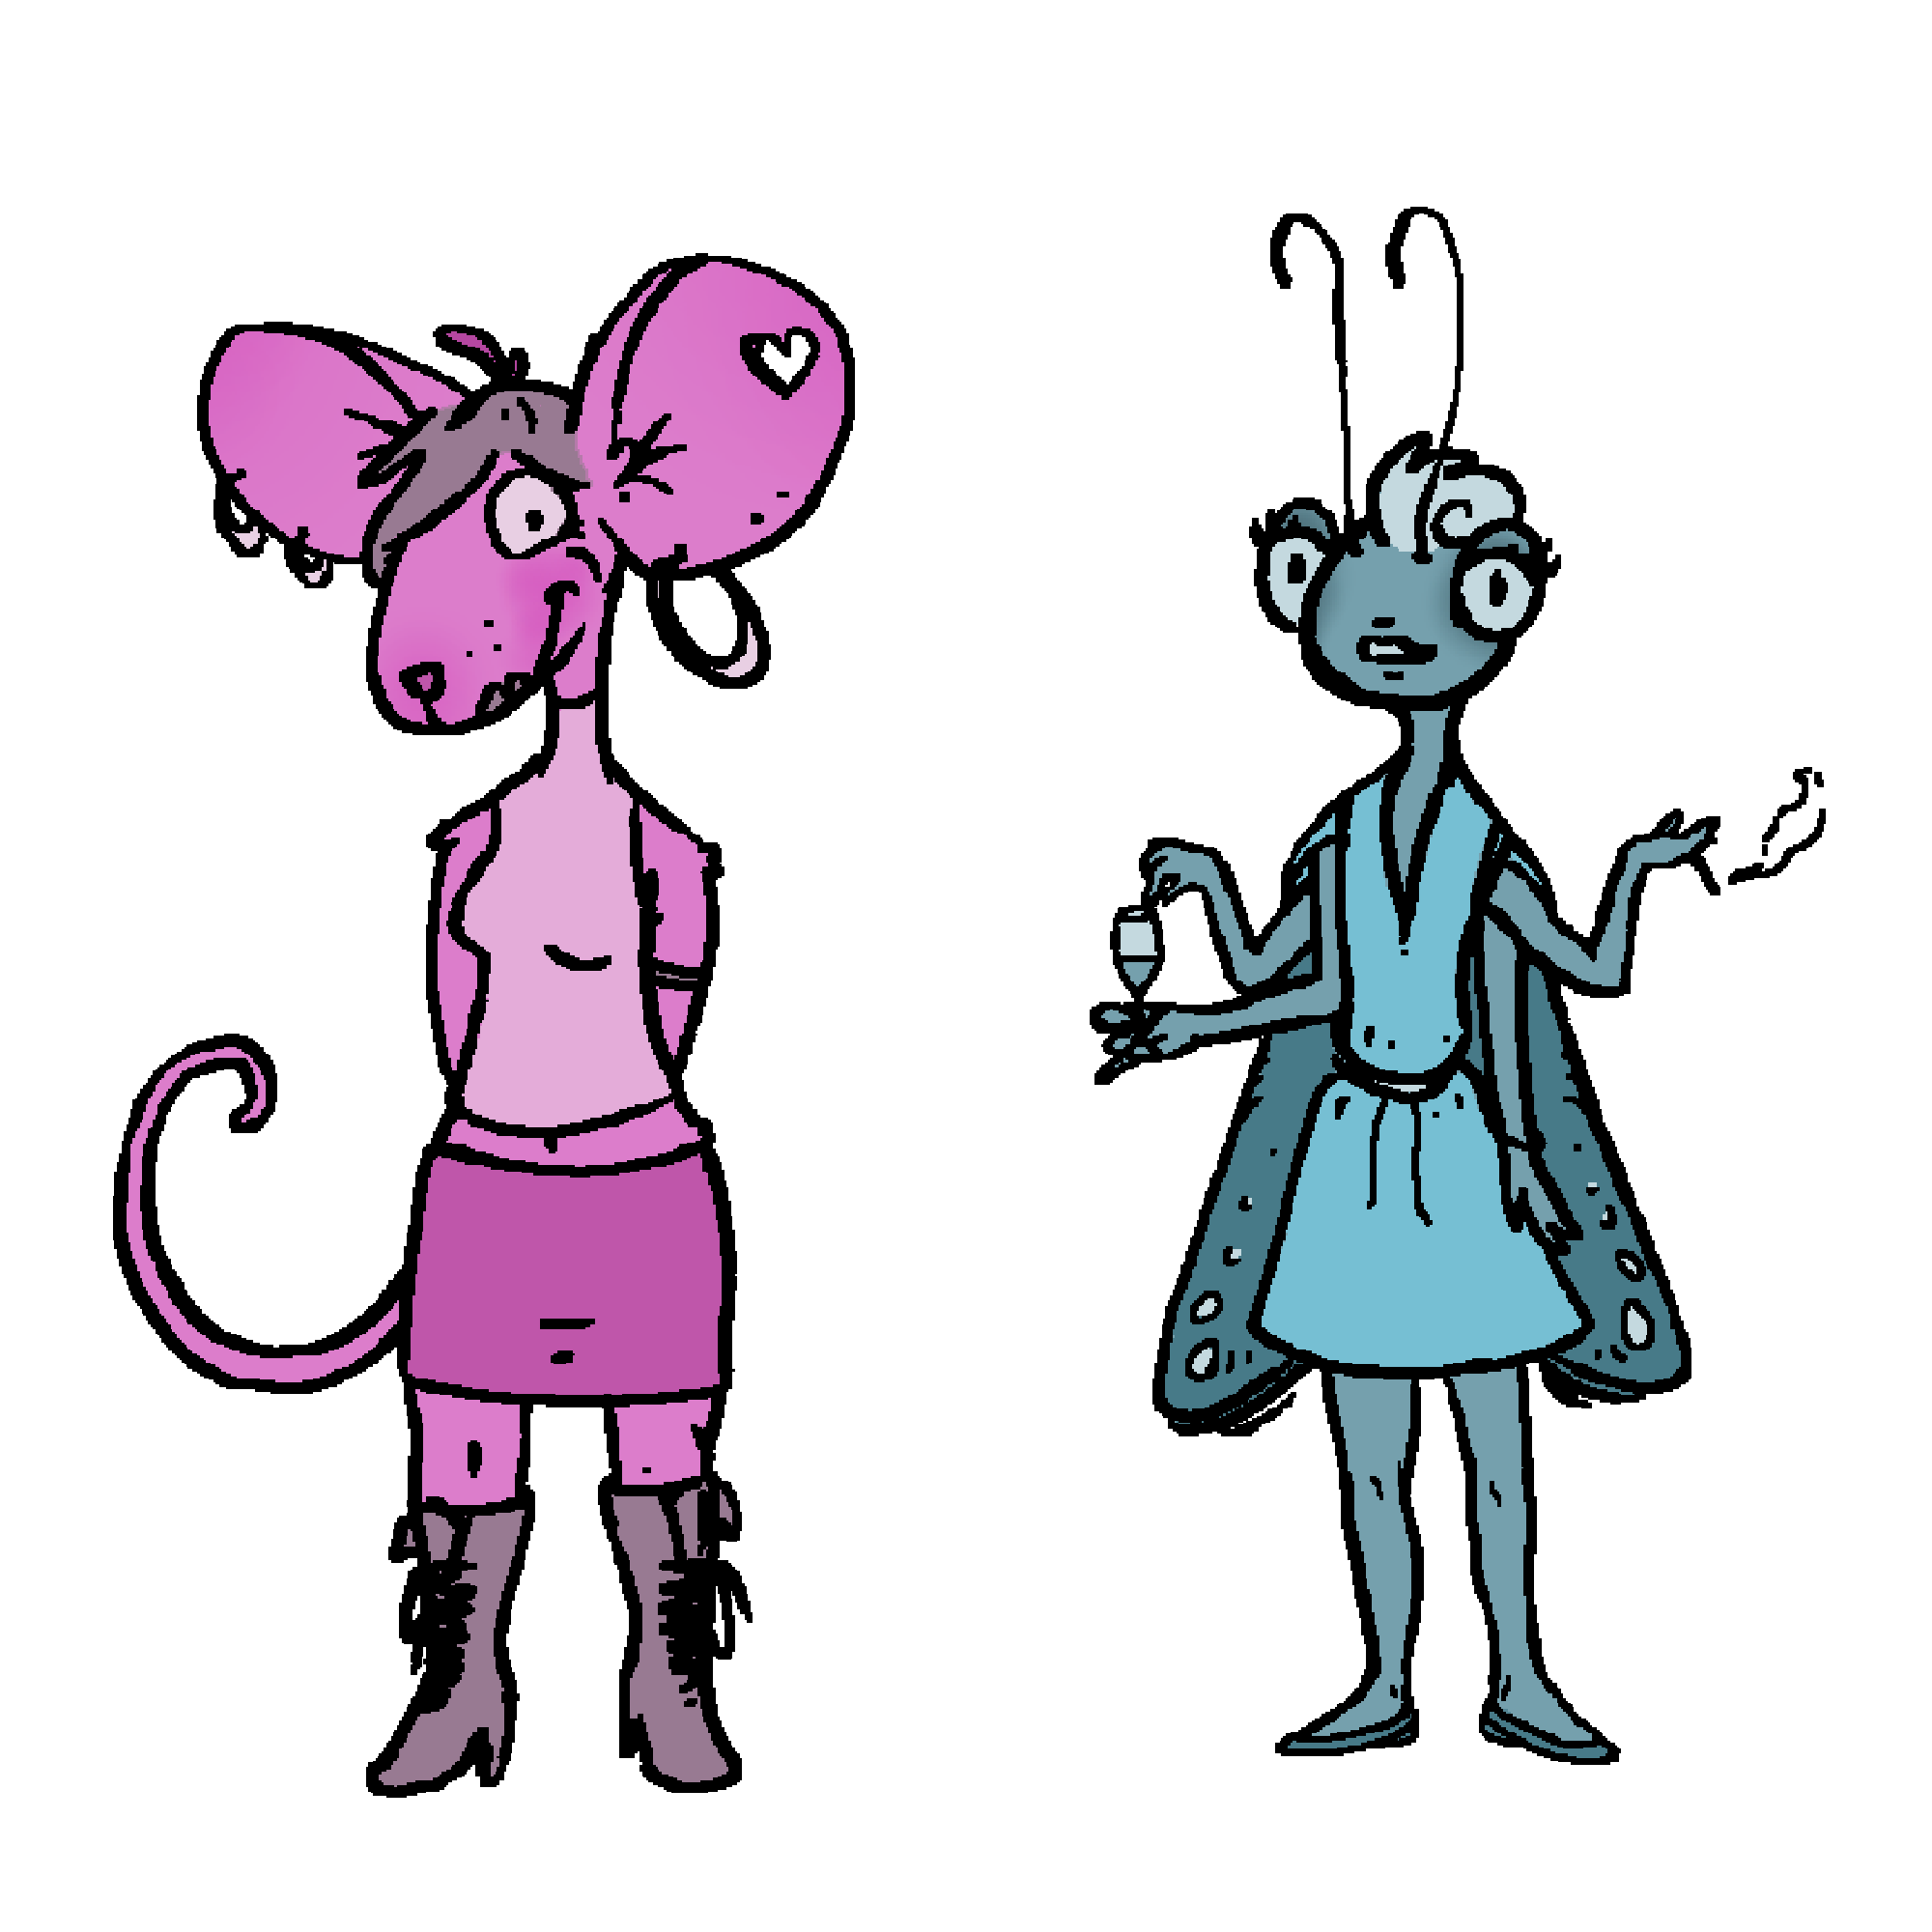 Character Designs for 'Ratbag' Game Concept